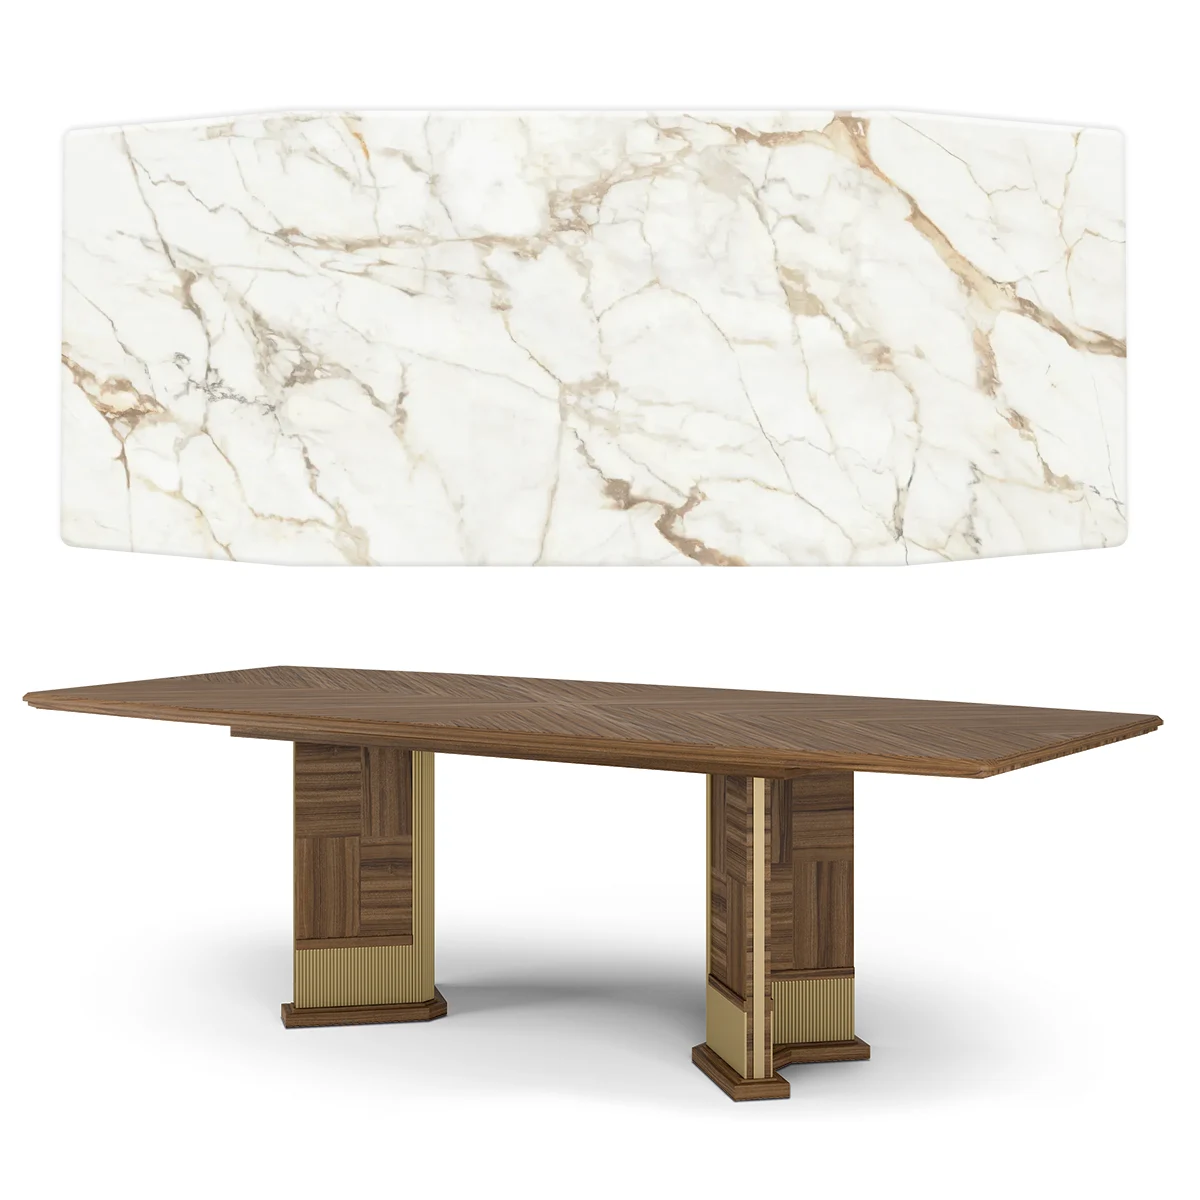 Brera table with wooden top made in italy su misura 3